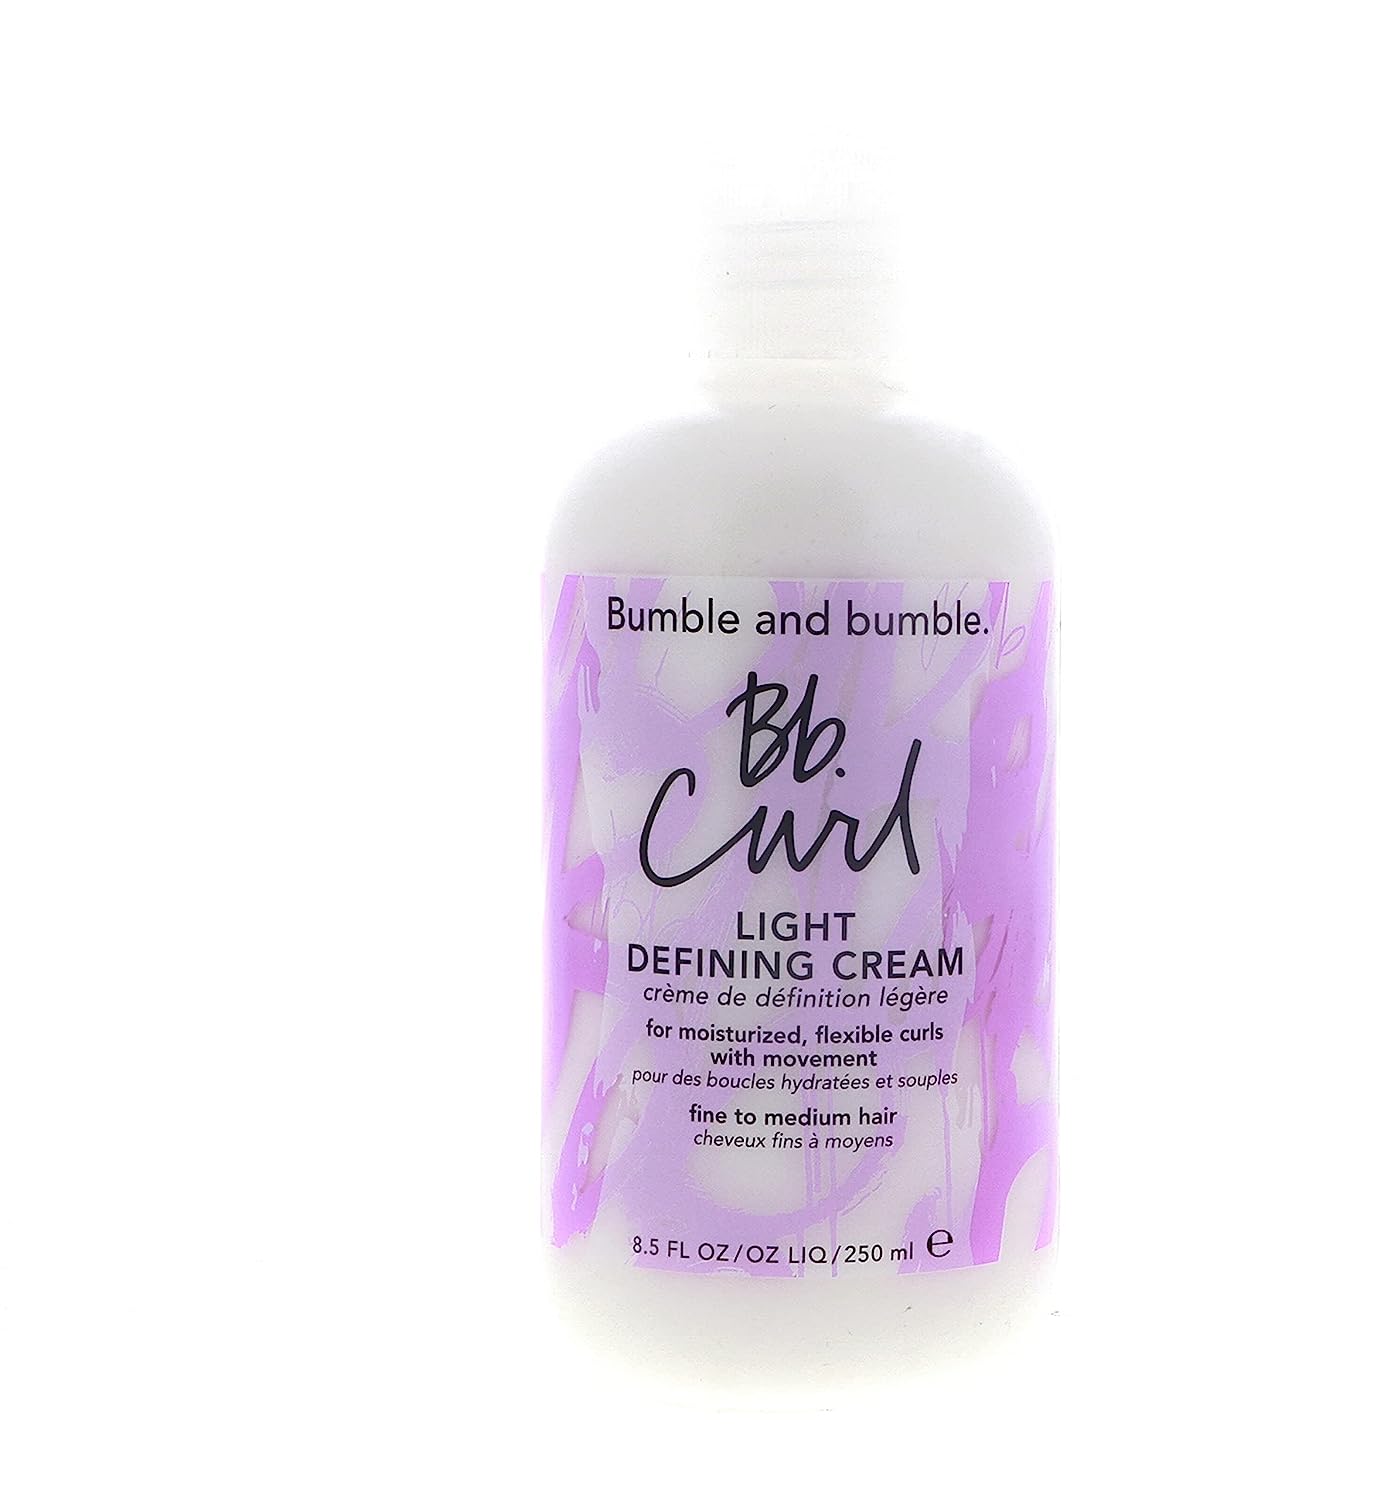 Bumble and bumble. Bb. Curl Light Defining Cream